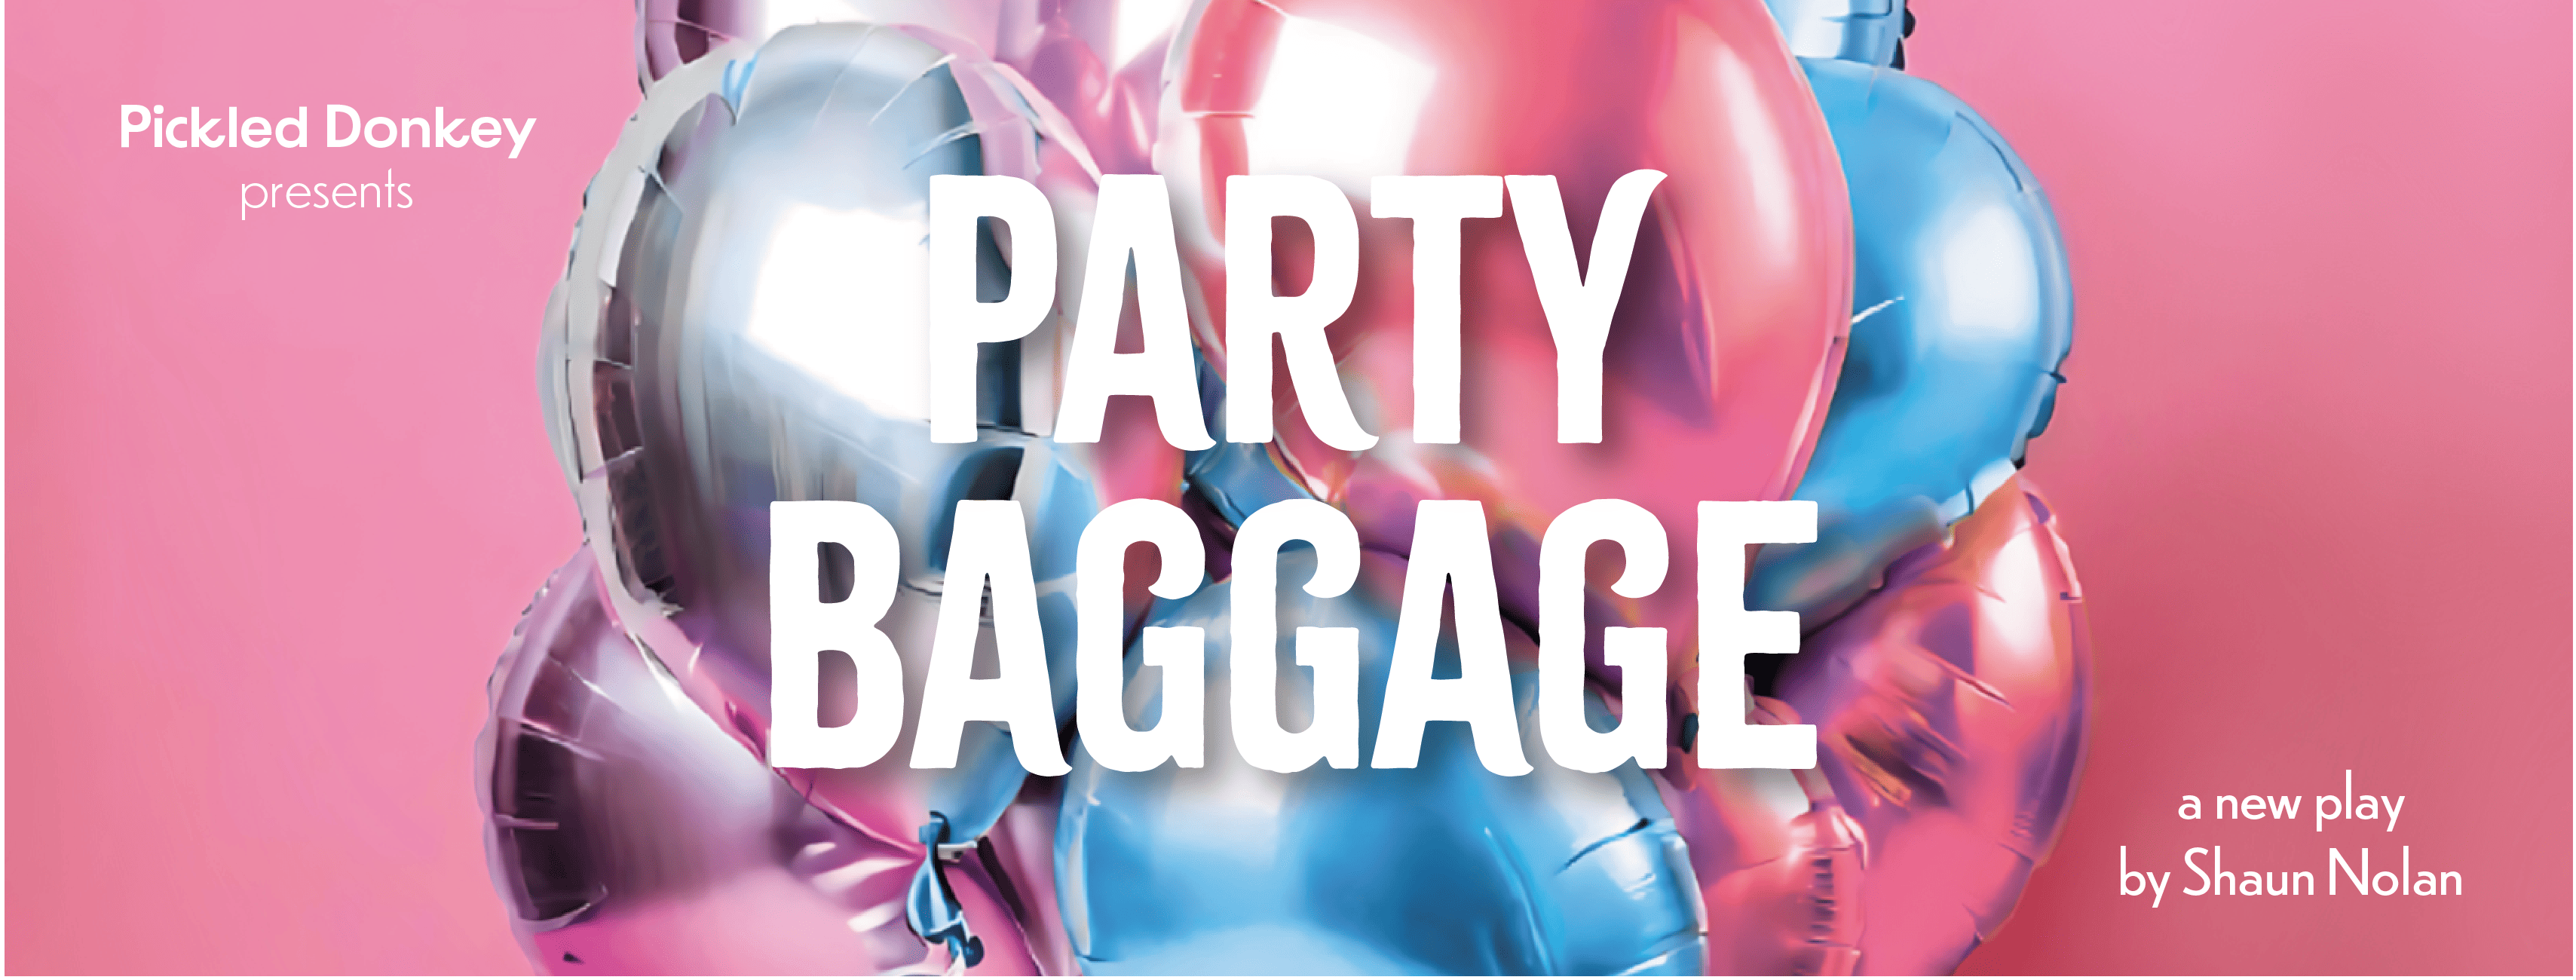 Party Baggage